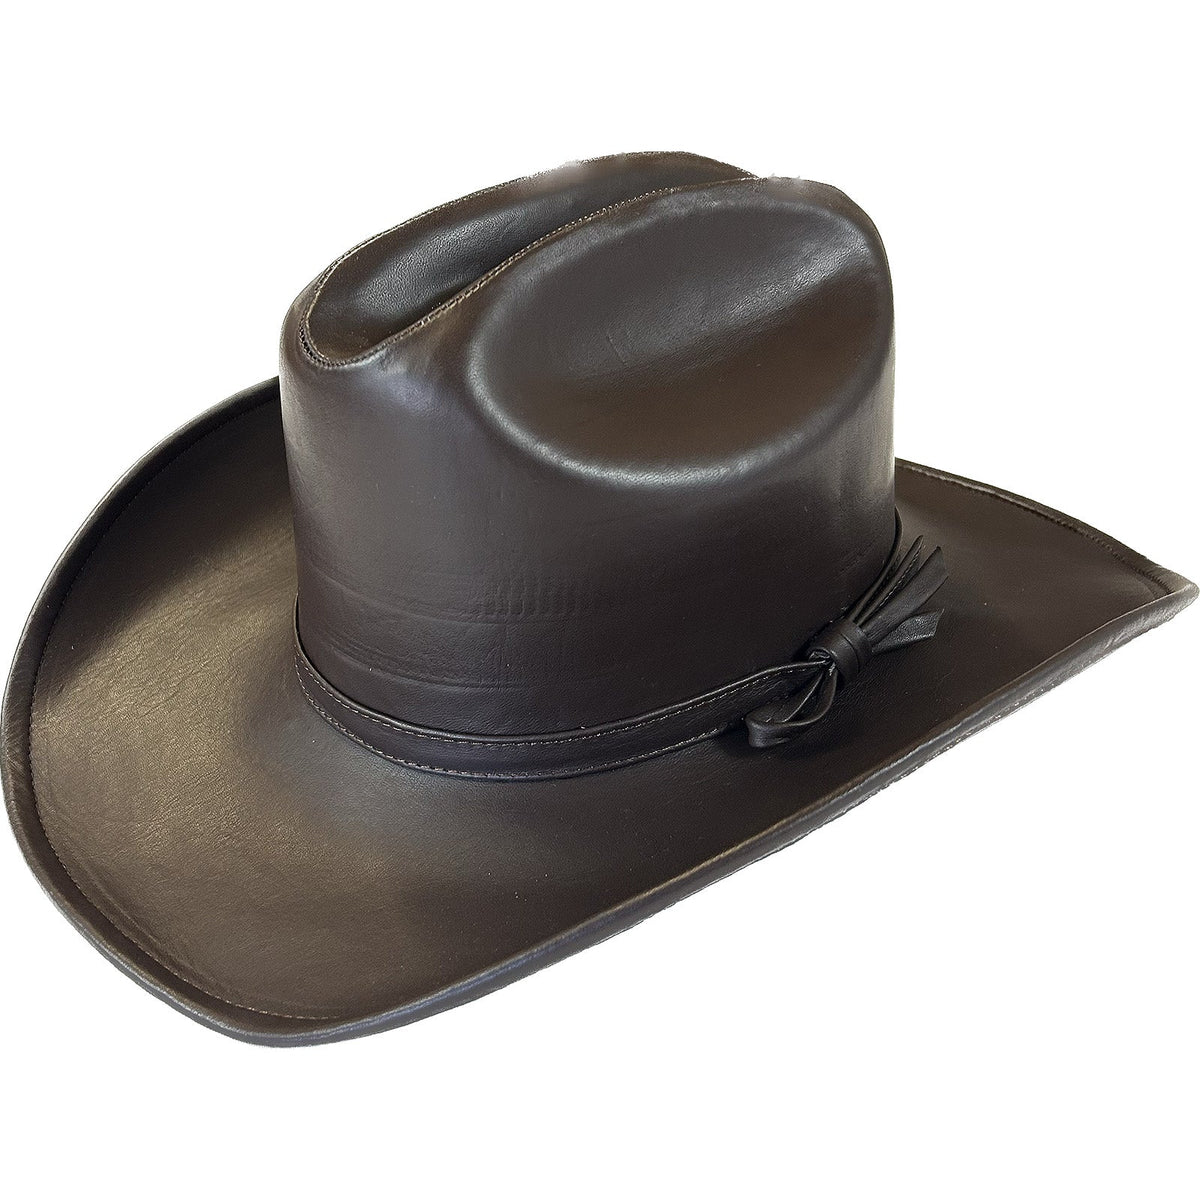 Rockmount Clothing Brown Leather Western Cowboy Hat